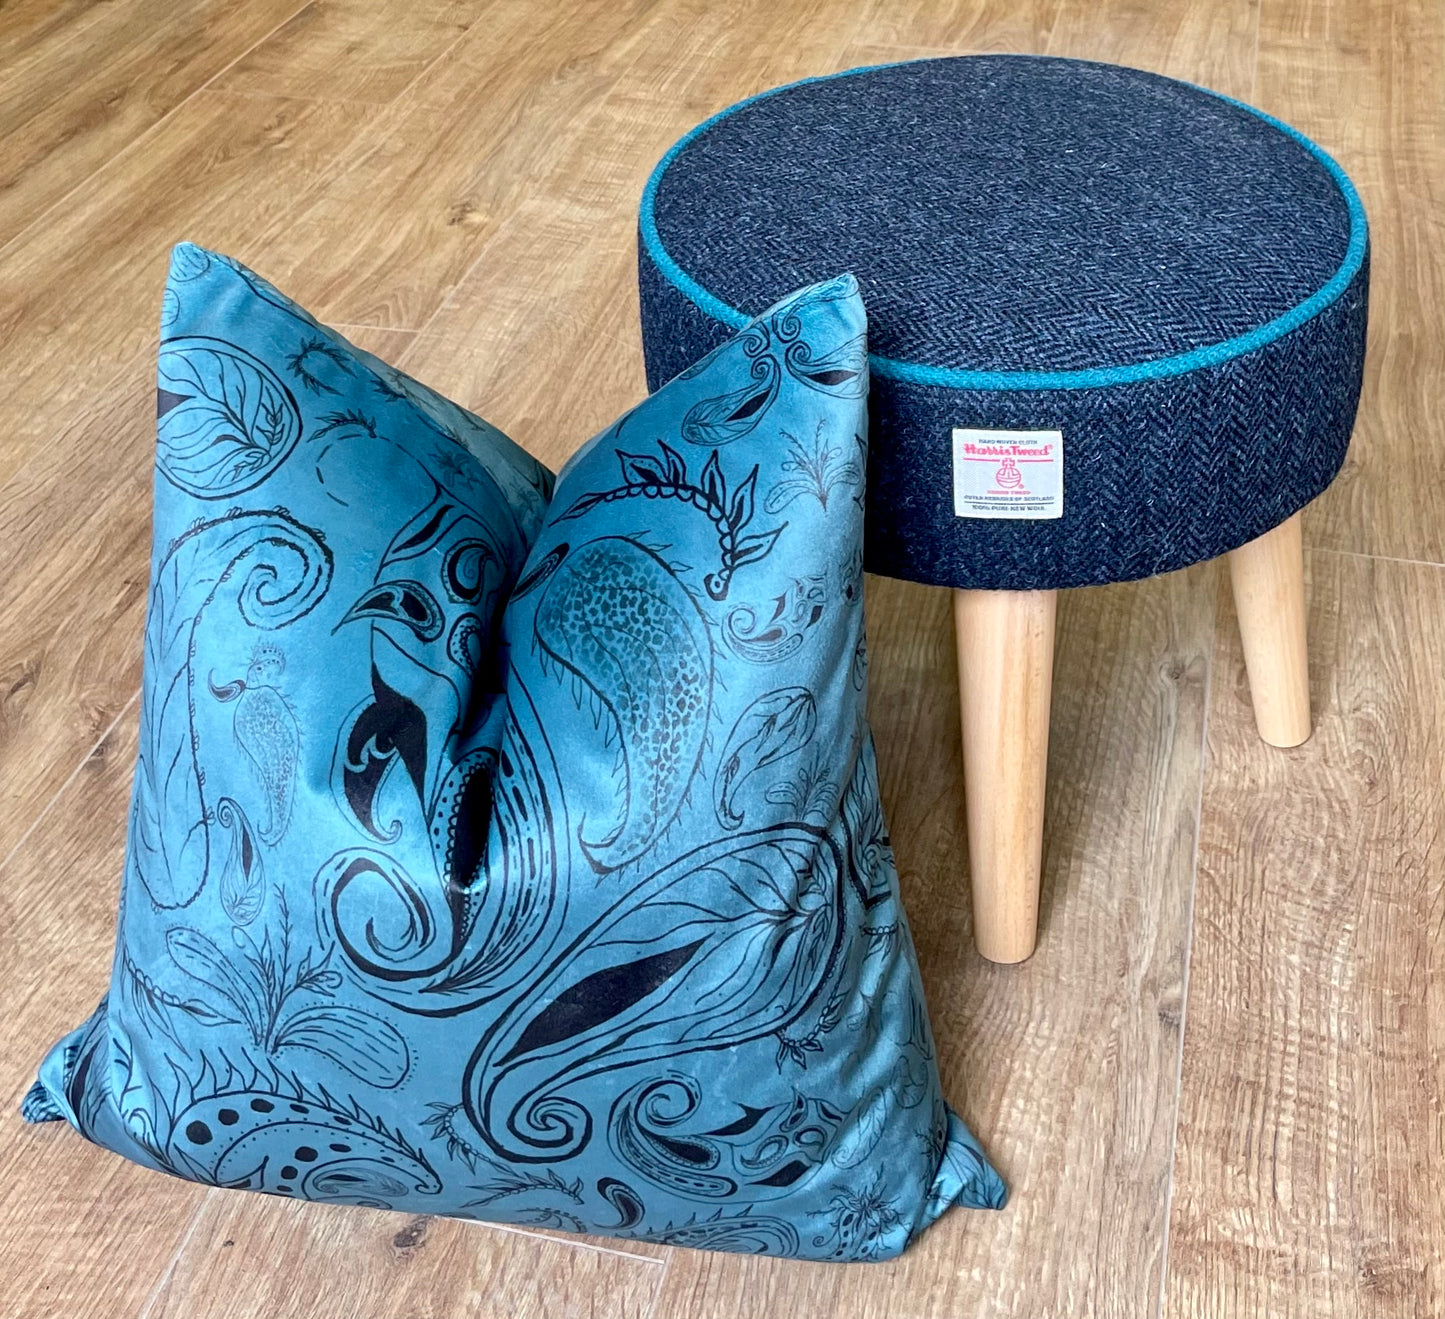 Navy Harris Tweed Footstool with Teal Piping and Varnished Wooden Legs